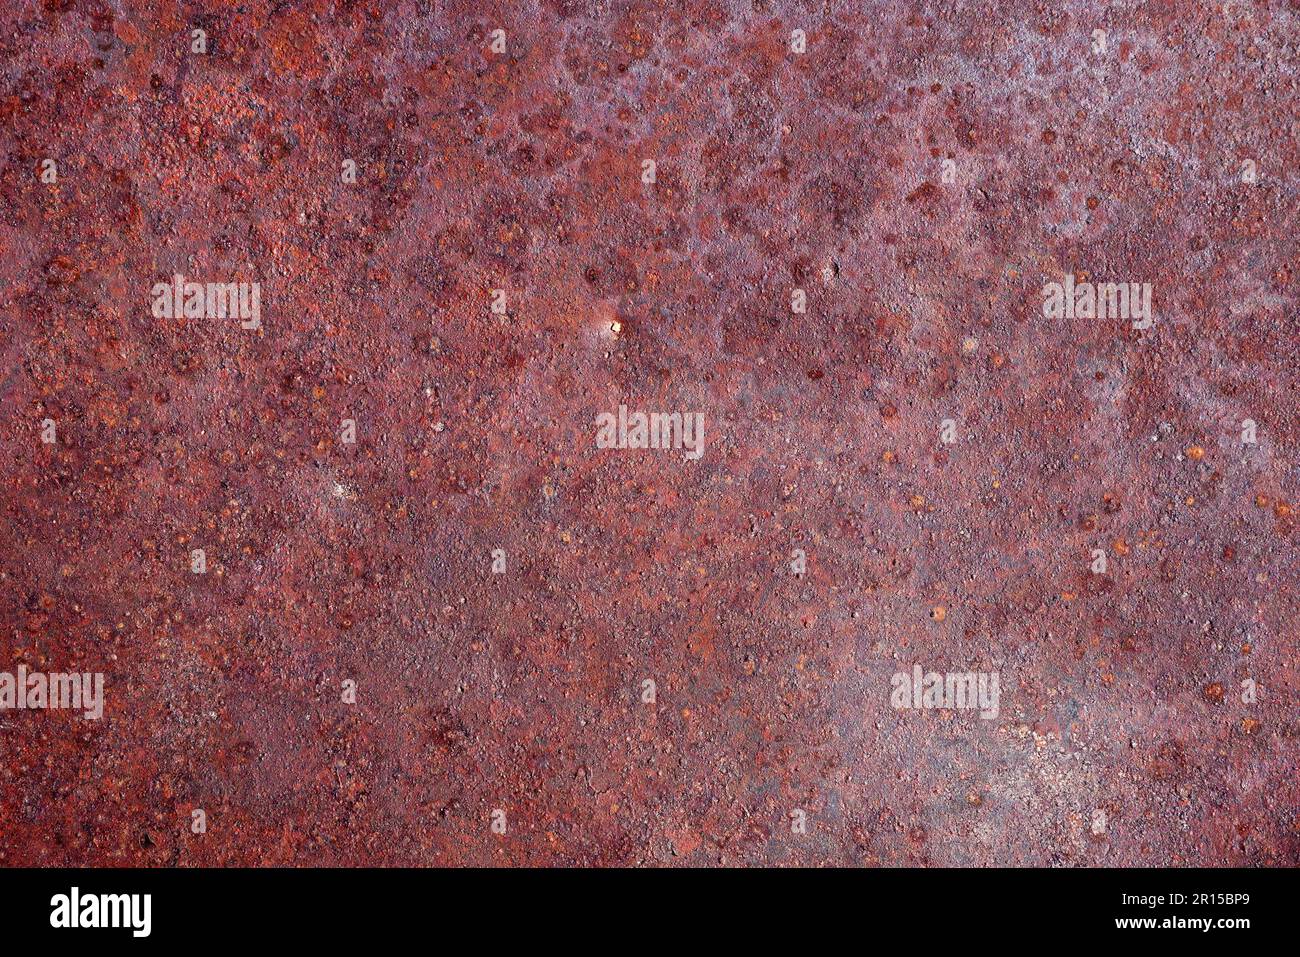 rusty corroded iron metal background texture Stock Photo